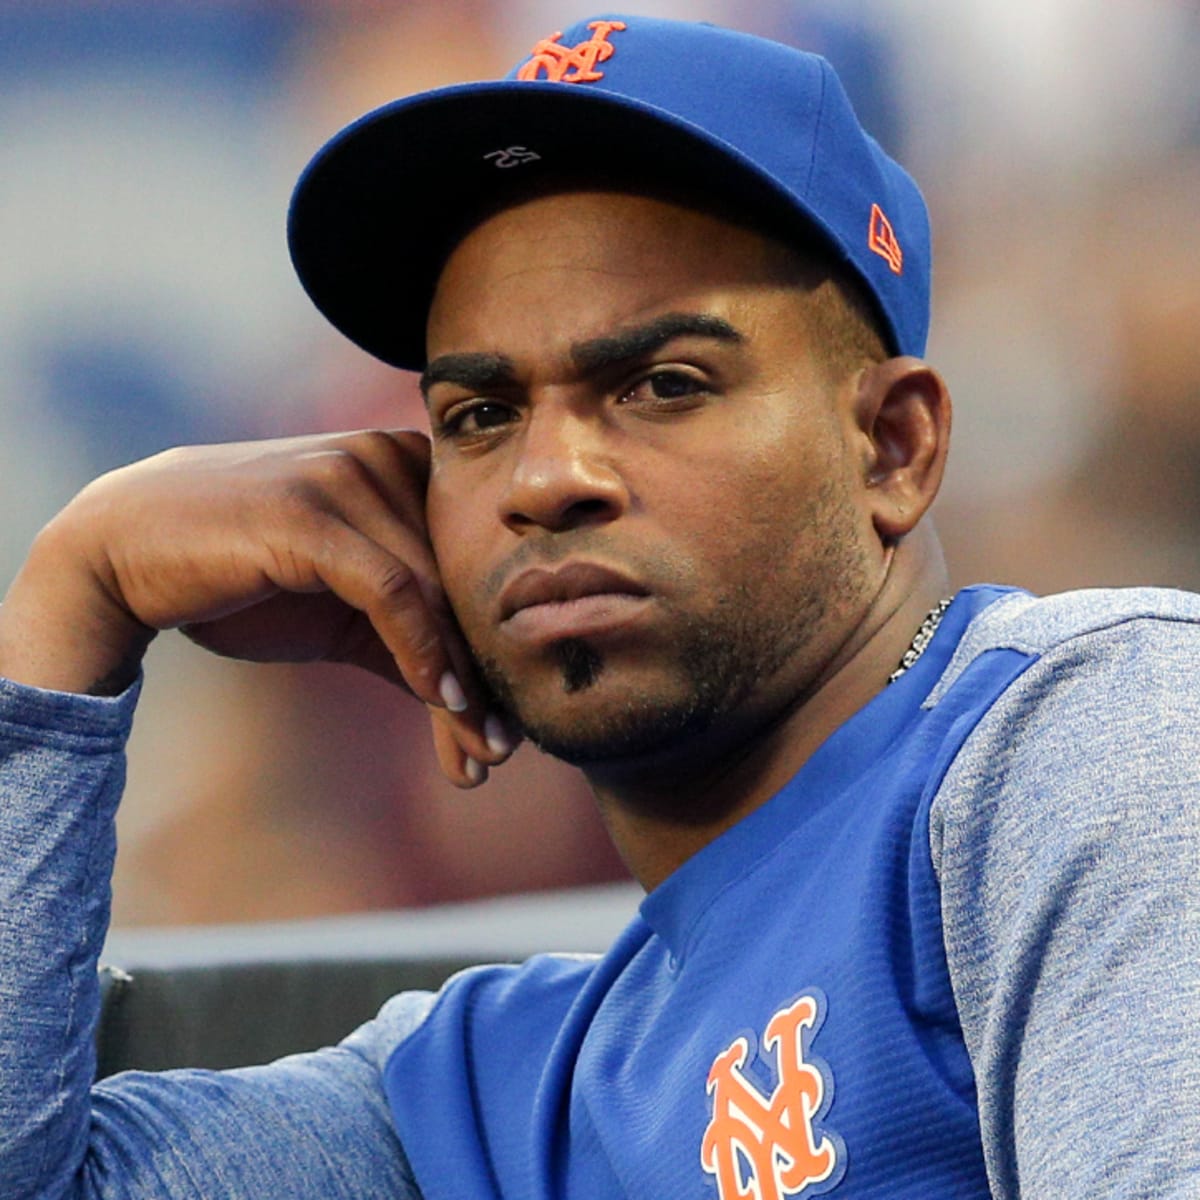 Yoenis Cespedes finally lands on DL 10 days after getting hurt - NBC Sports